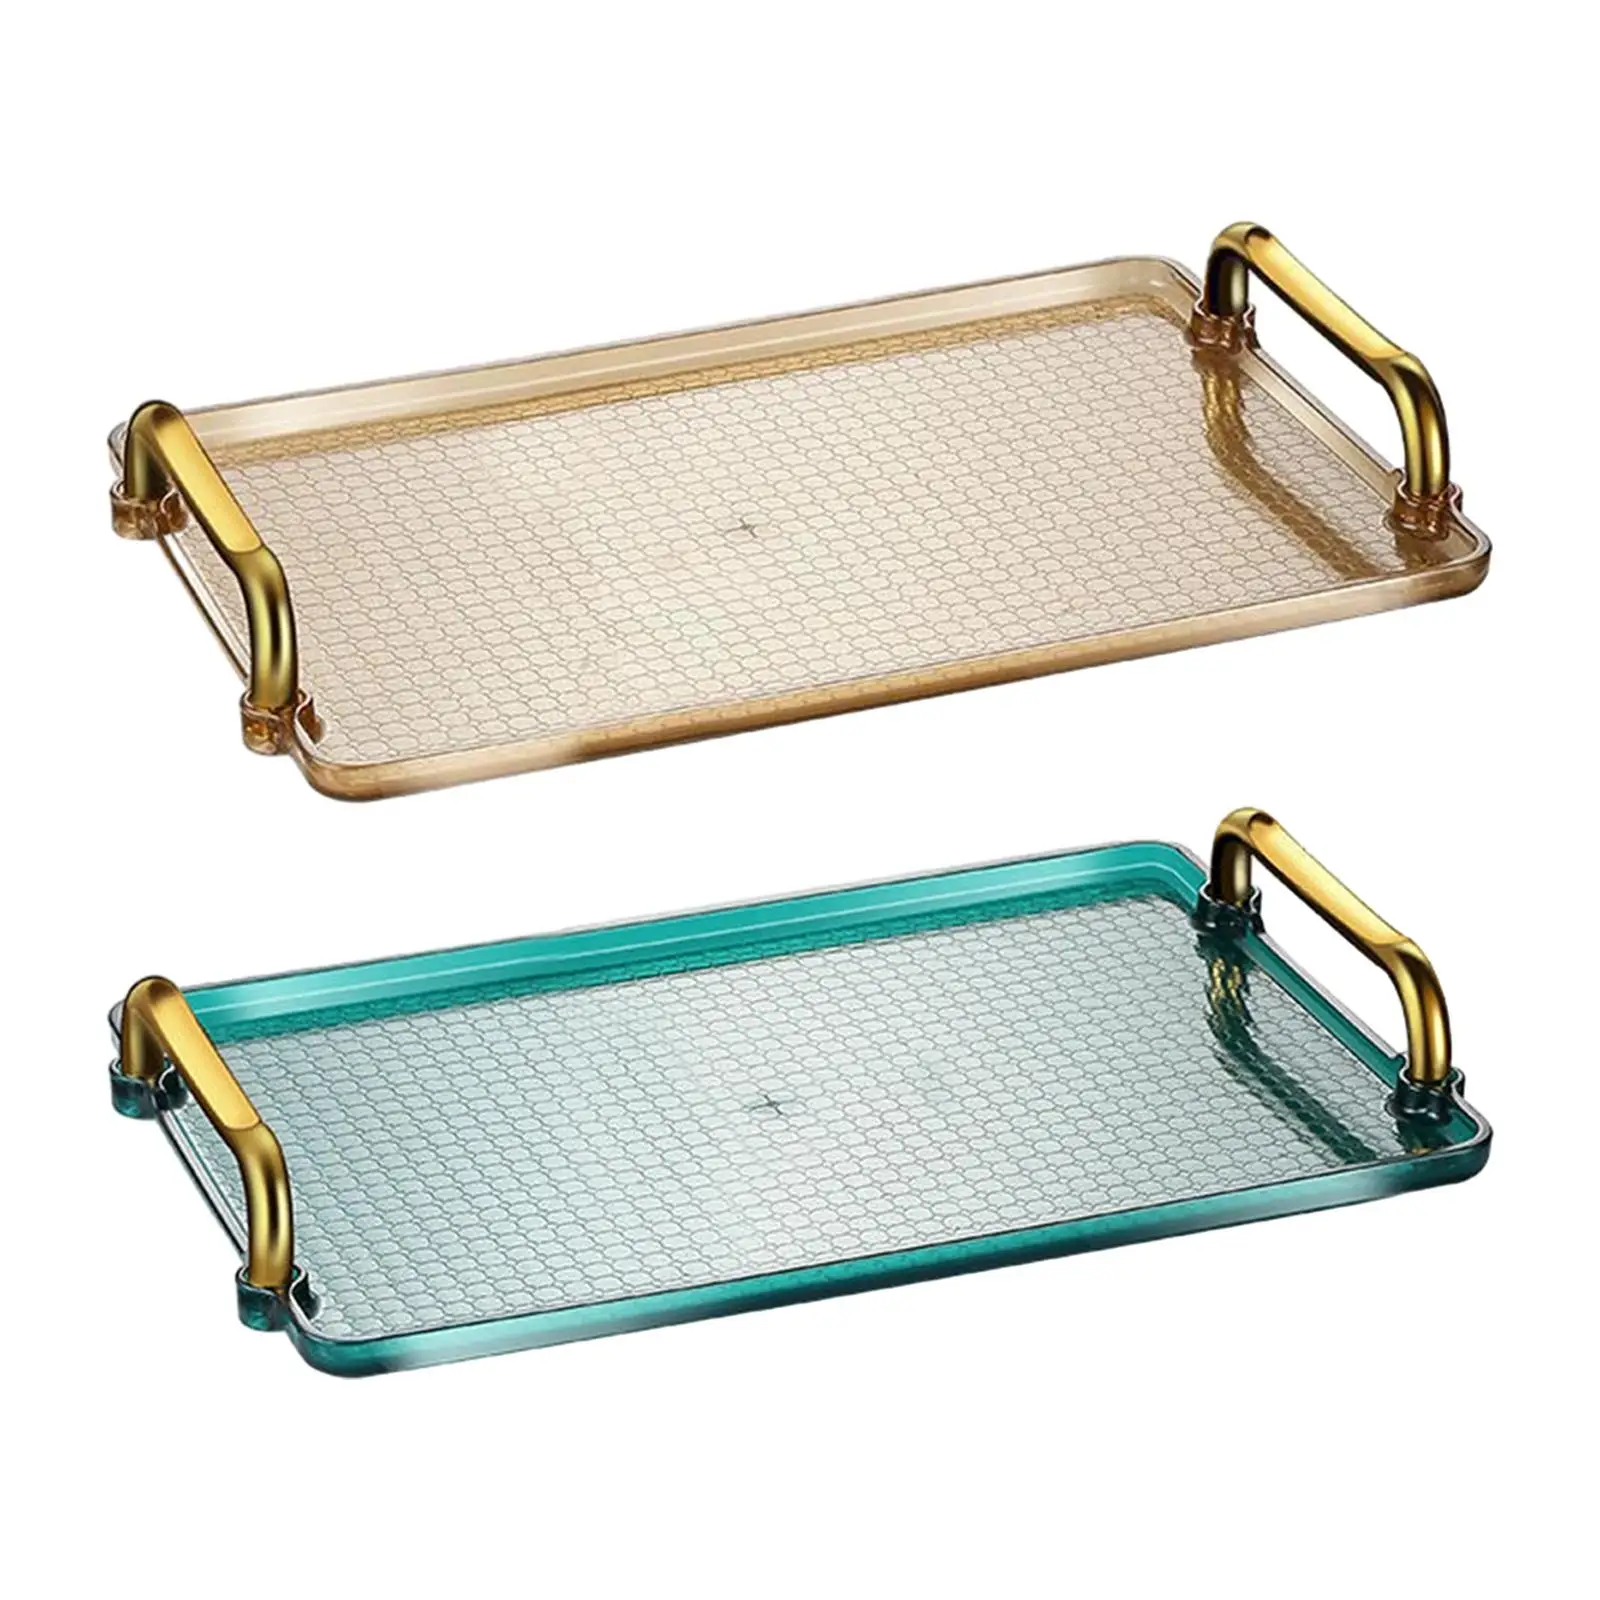 Serving Tray Platter Easy to Clean Versatile for Bar, Kitchen, Dining Room Convenient Table Organizer Decorative Ottoman Tray